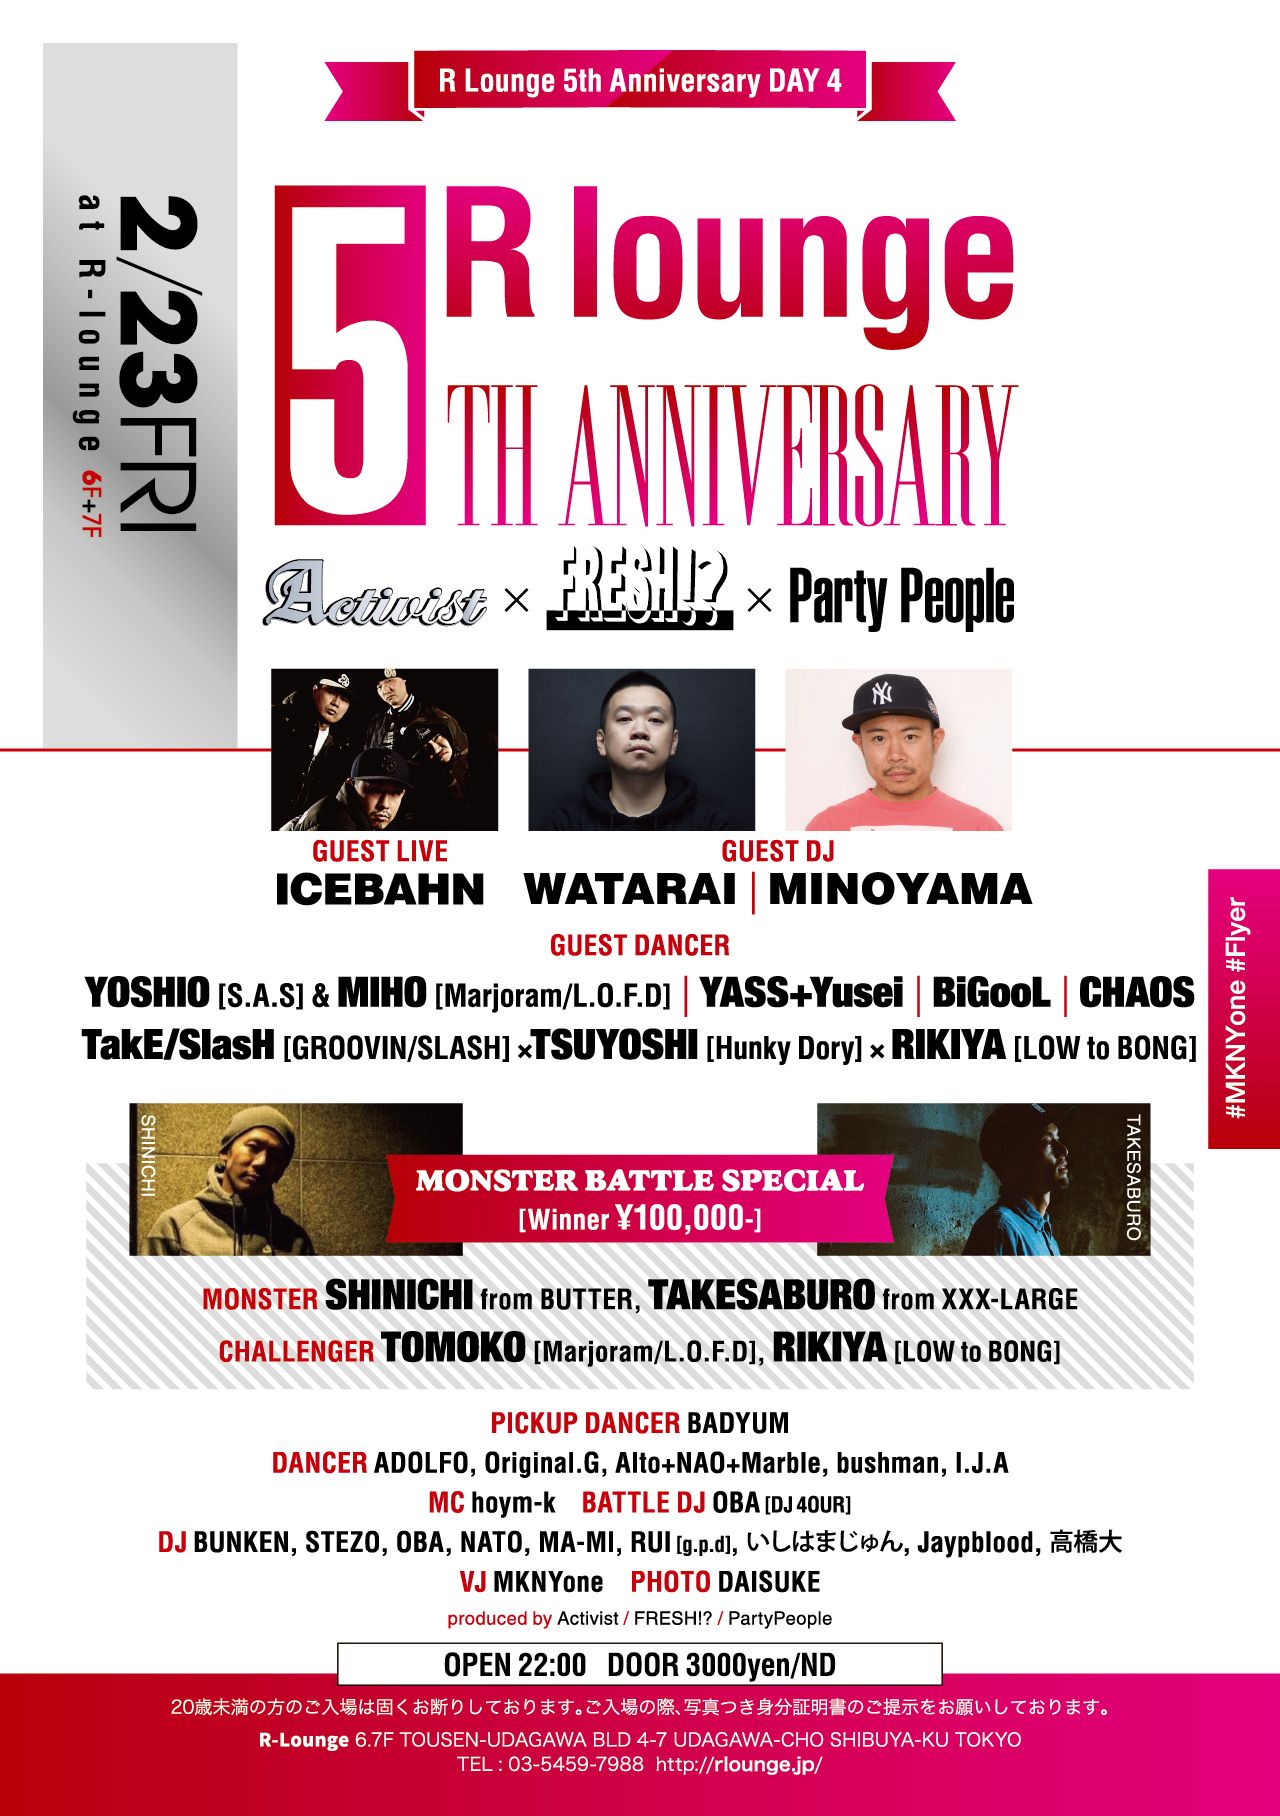 R Lounge 5TH ANNIVERSARY DAY4 PartyPeople x FRESH!? x Activist -1on1 HIPHOP DANCE BATTLE MONSTER SPECIAL-